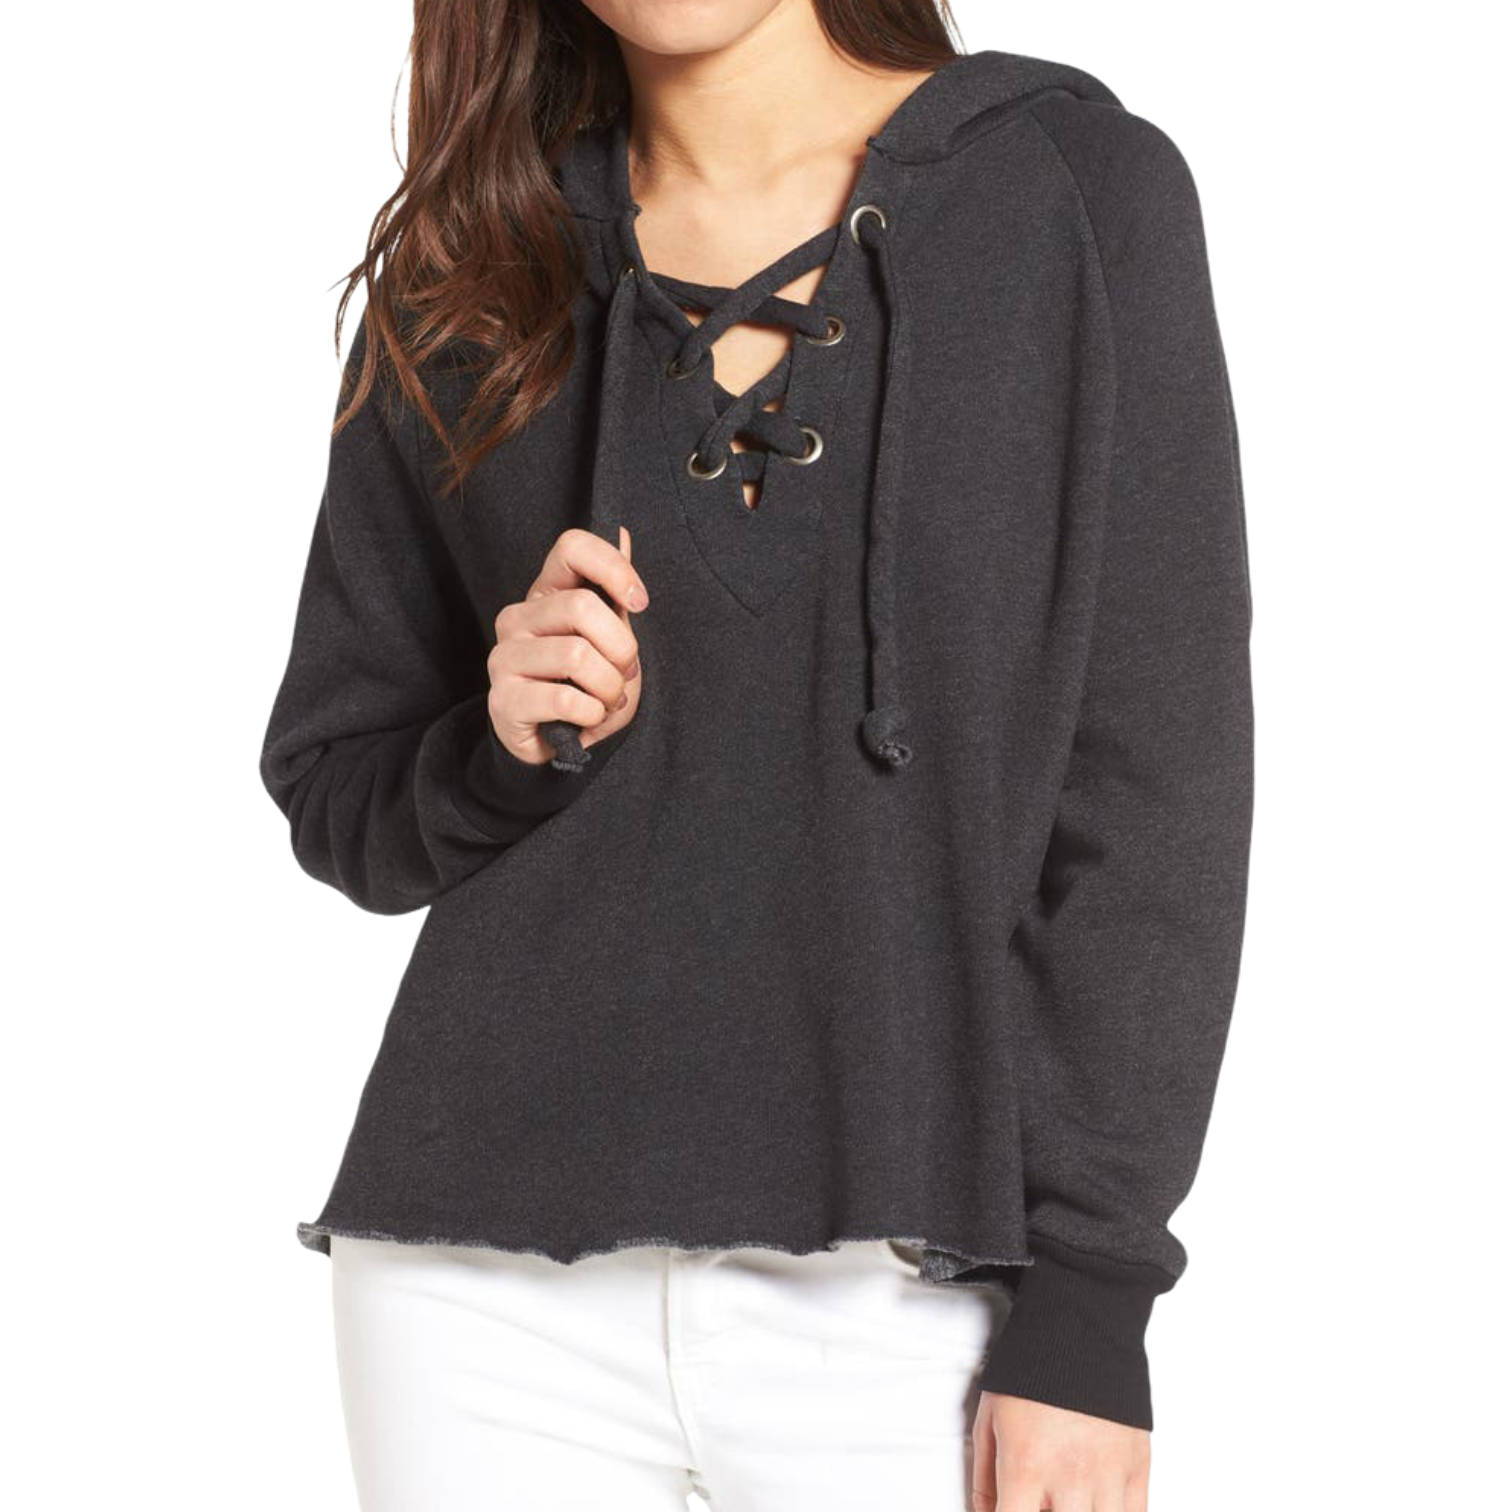 Wildfox Hutton Hoodie in Dark Gray and Clean White Contrast